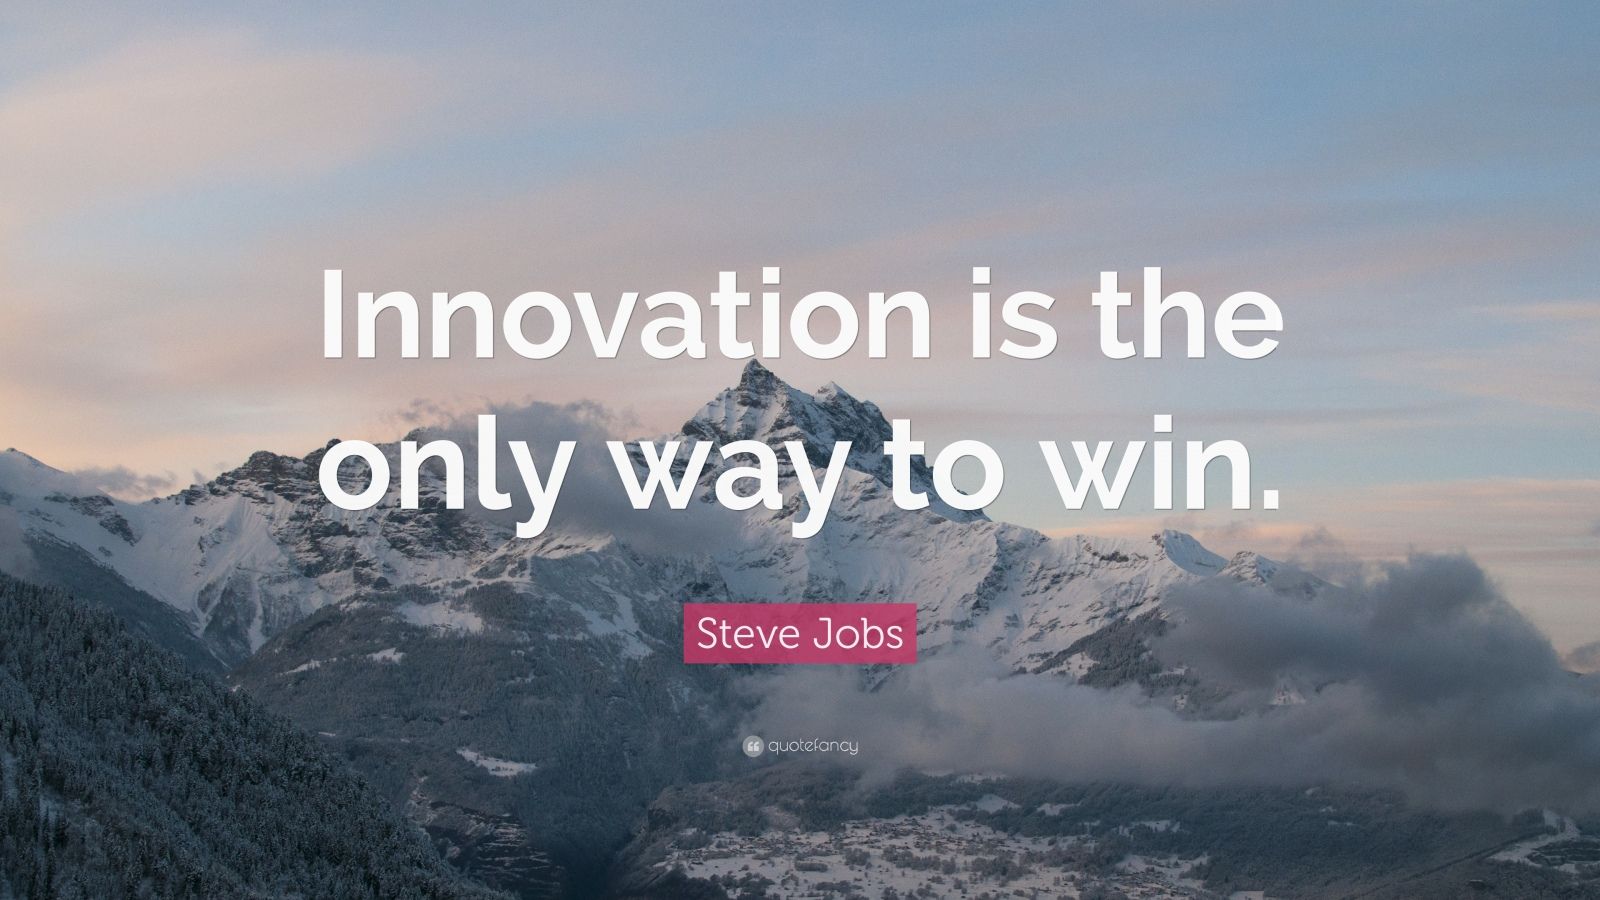 Steve Jobs Quote: “Innovation is the only way to win.” (23 wallpapers